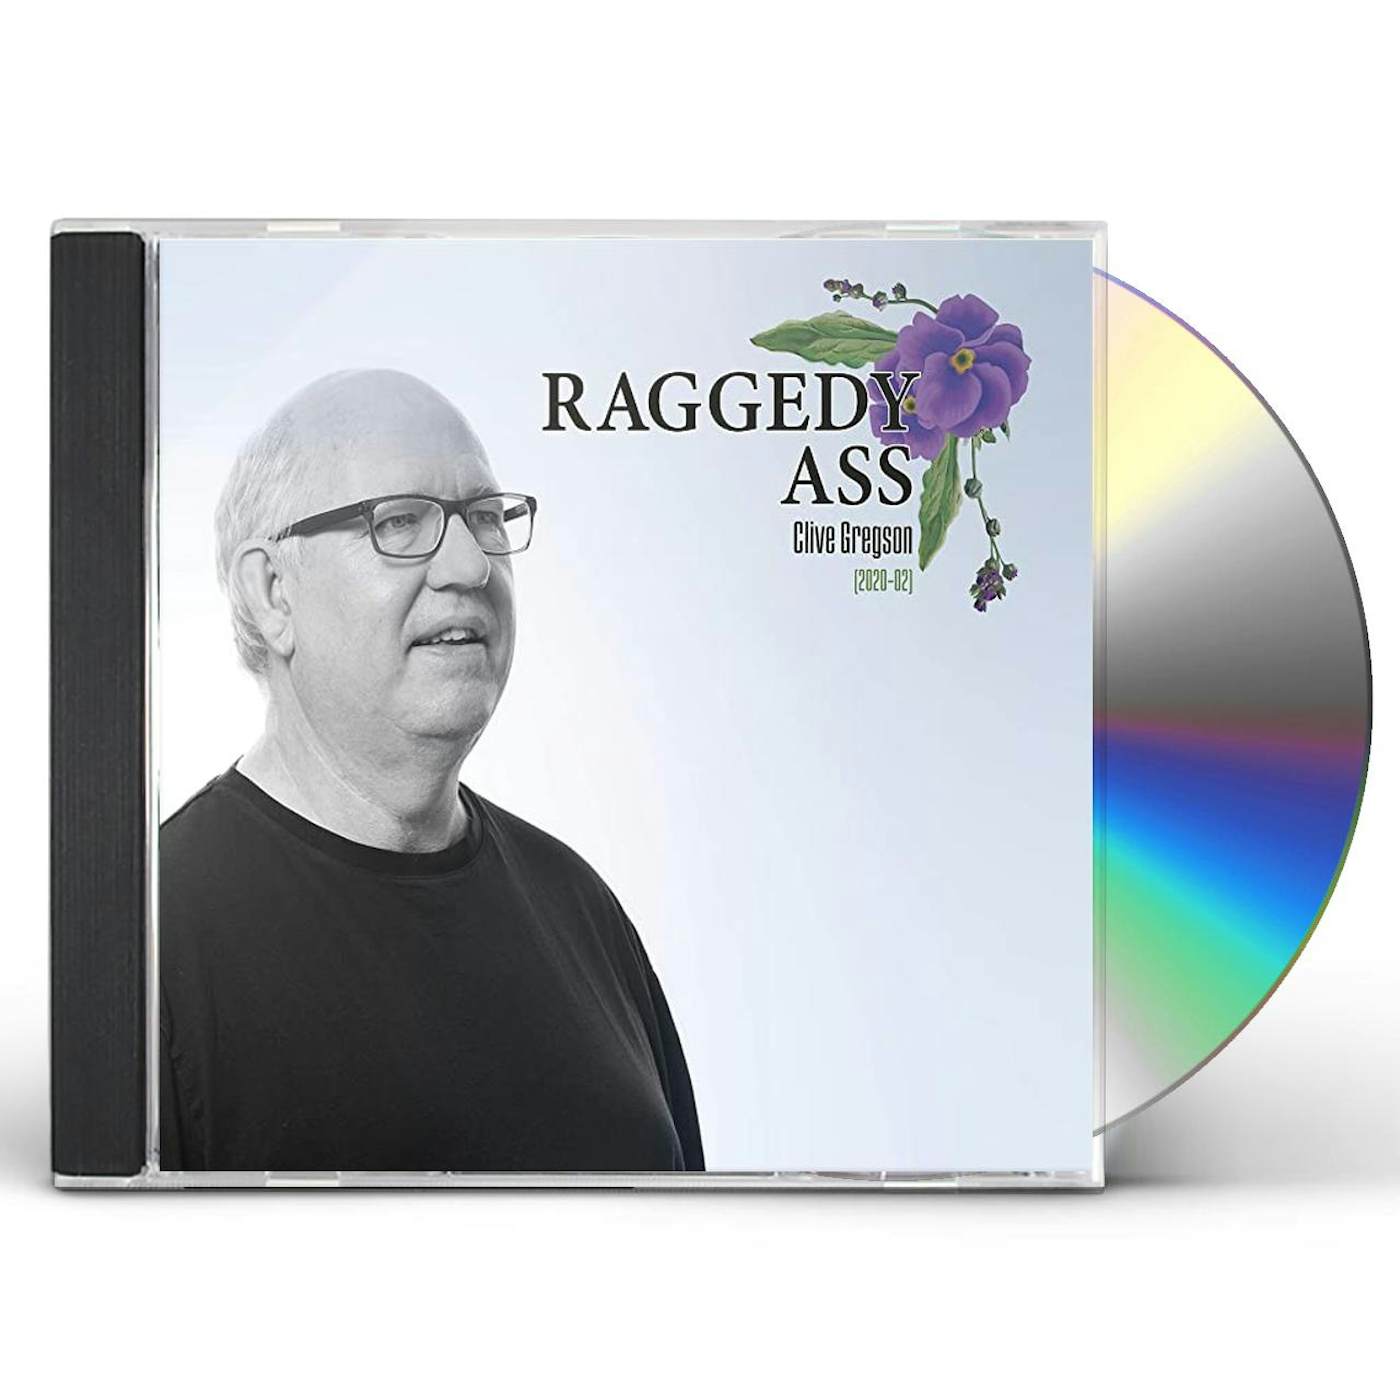 Clive Gregson RAGGEDY ASS (2020-02) CD